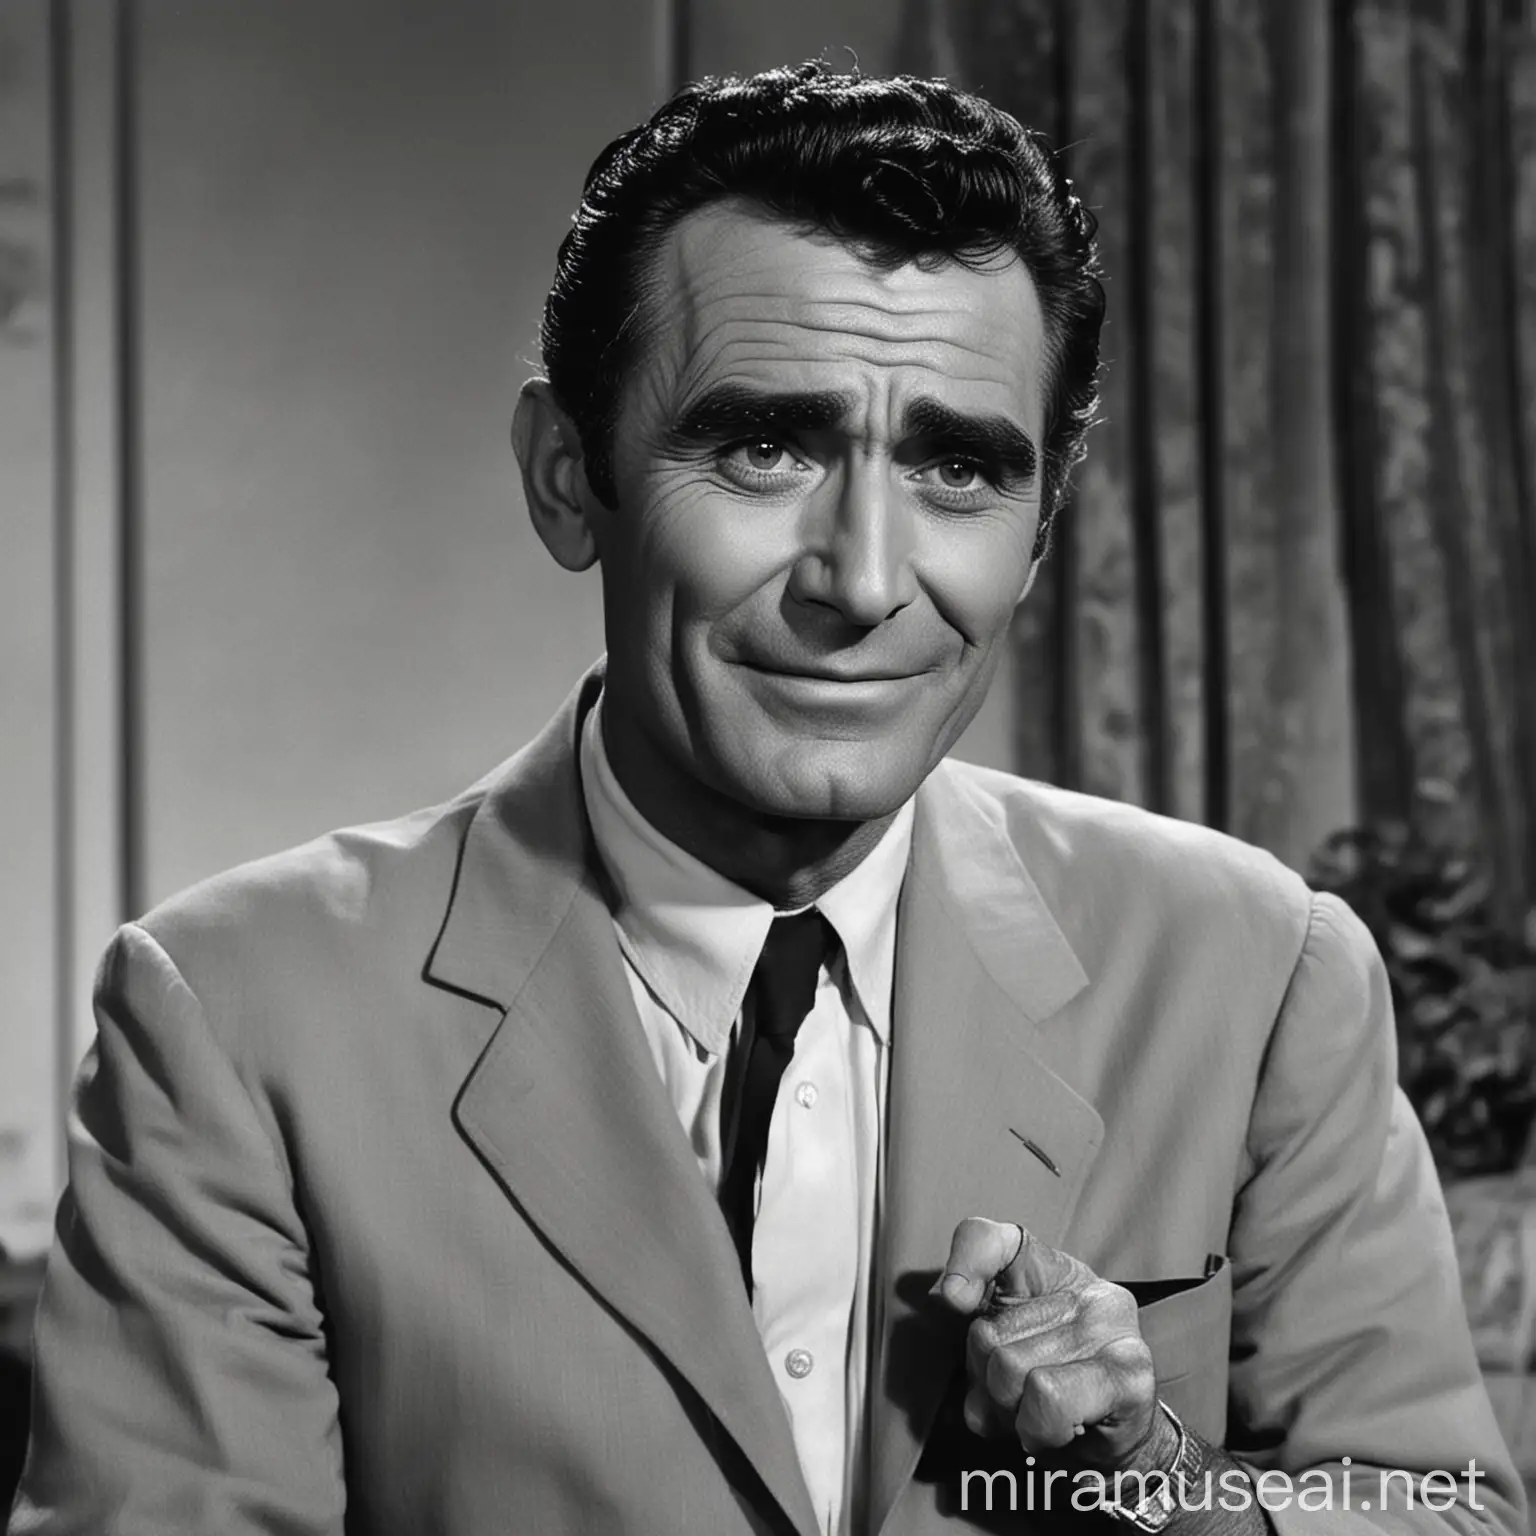 Rod Serling and Shardai Embrace in a LoveFilled Encounter